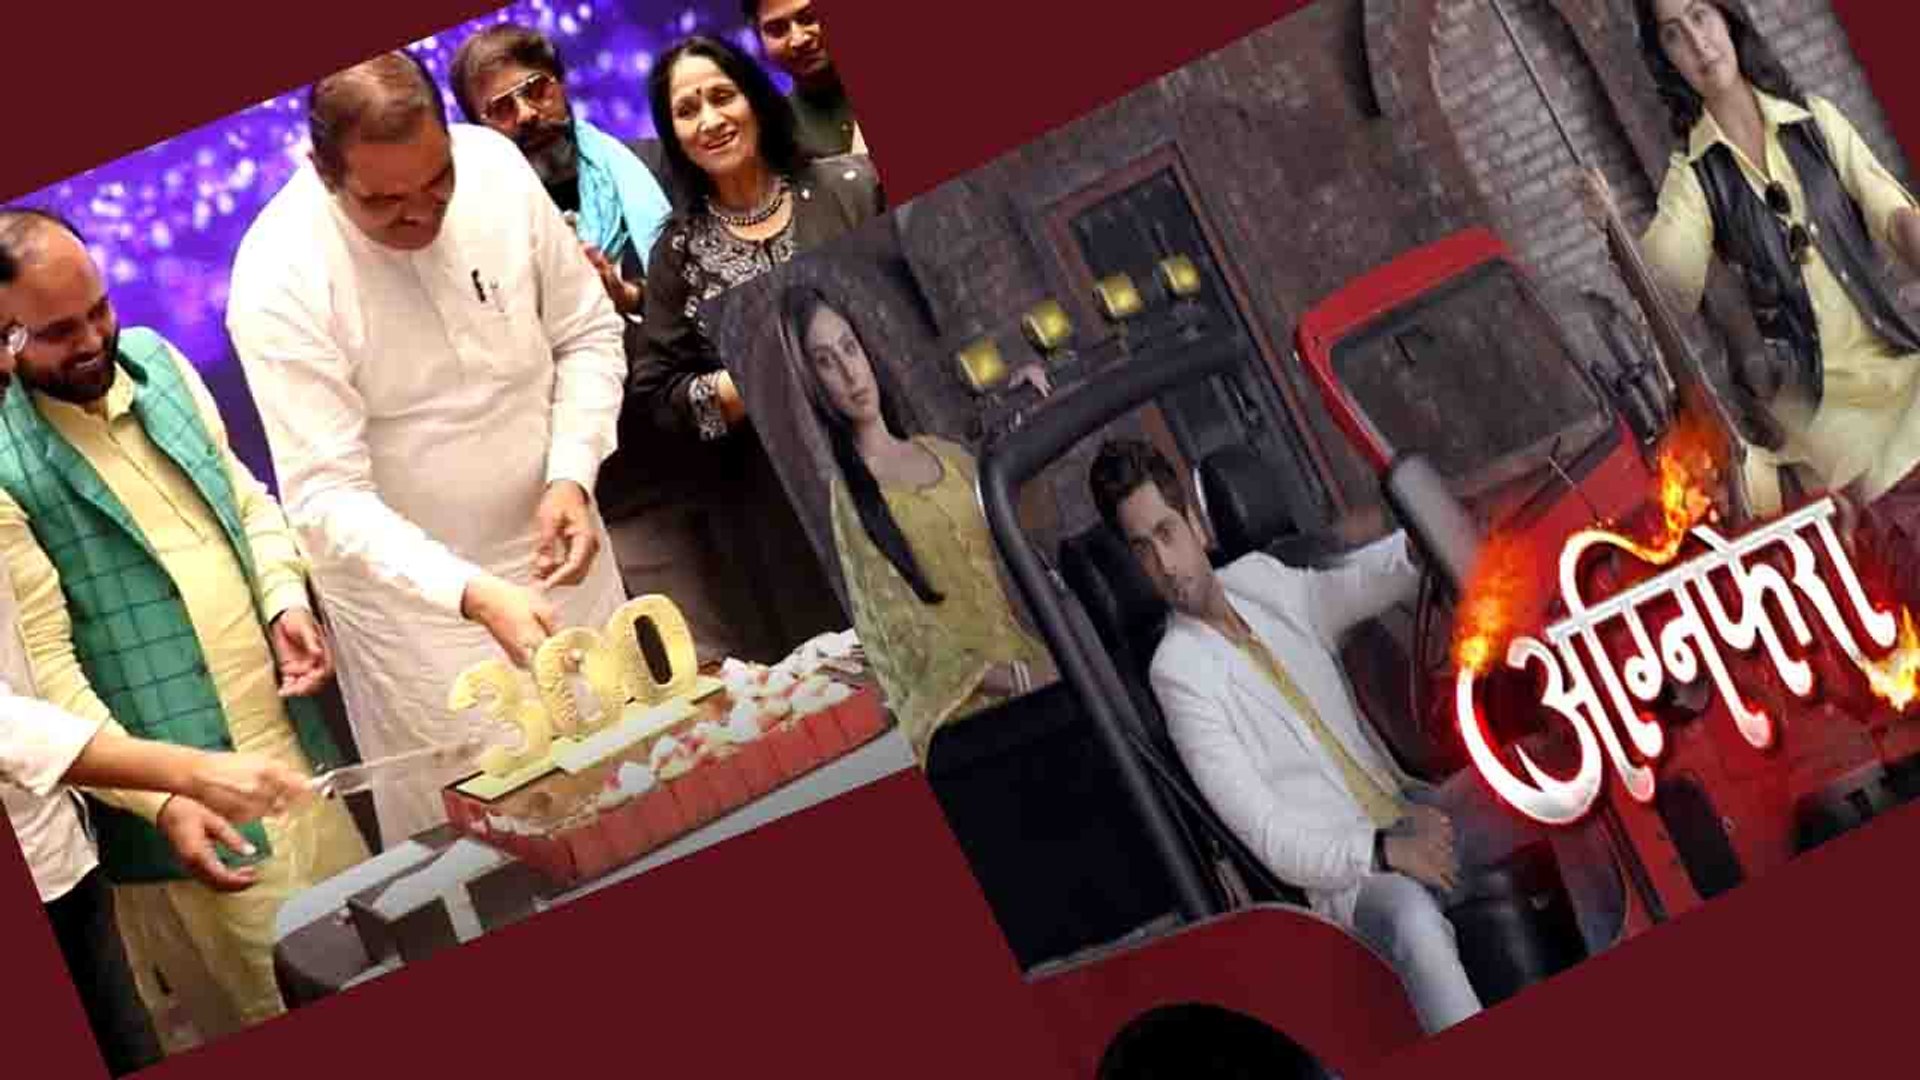 Agnifera Starcast Celbrates Completion Of 300 Episodes Sucess Party Watch Video Filmibeat Video Dailymotion Agnifera is a hindi drama television series starring ankit gera, yukti kapoor and simran kaur. agnifera starcast celbrates completion of 300 episodes sucess party watch video filmibeat